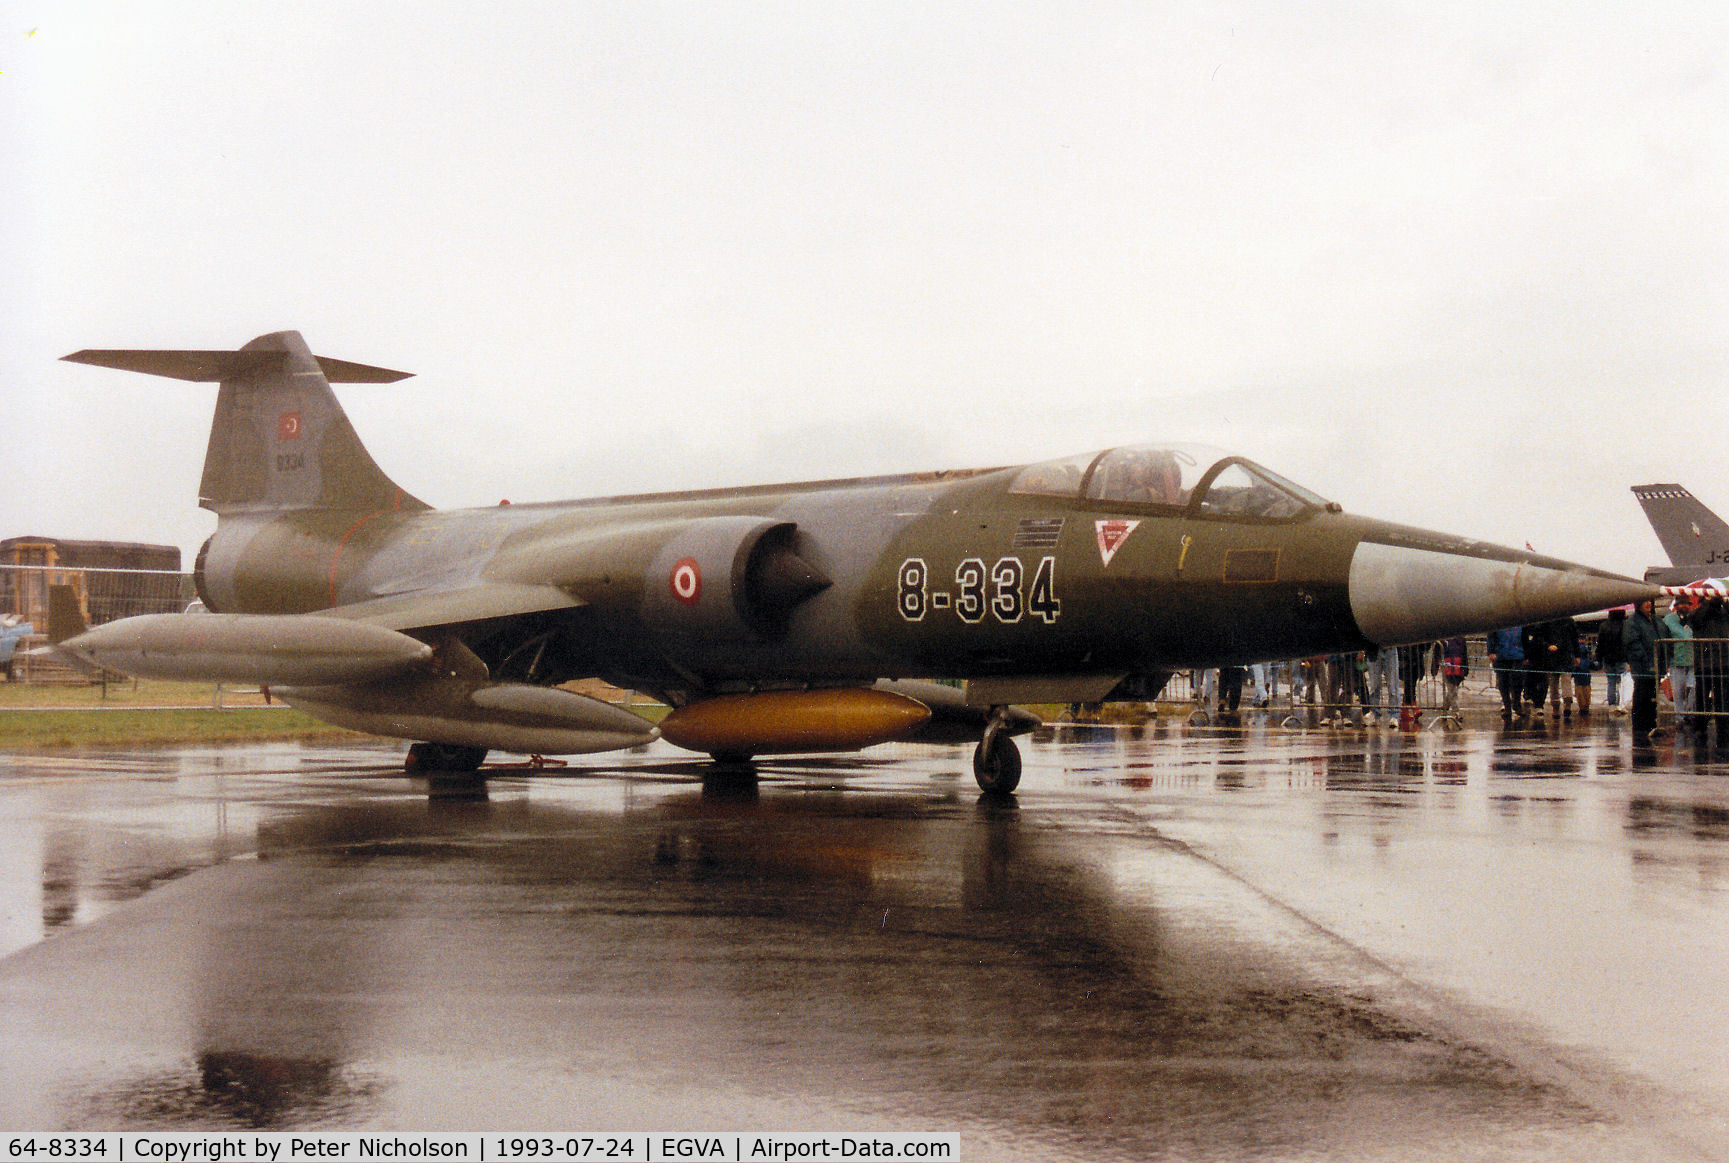 64-8334, 1964 Lockheed F-104G Starfighter C/N 683-8334, F-104G Starfighter as 8-334 of 181 Filo Turkish Air Force on display at the 1993 Intnl Air Tattoo at RAF Fairford.